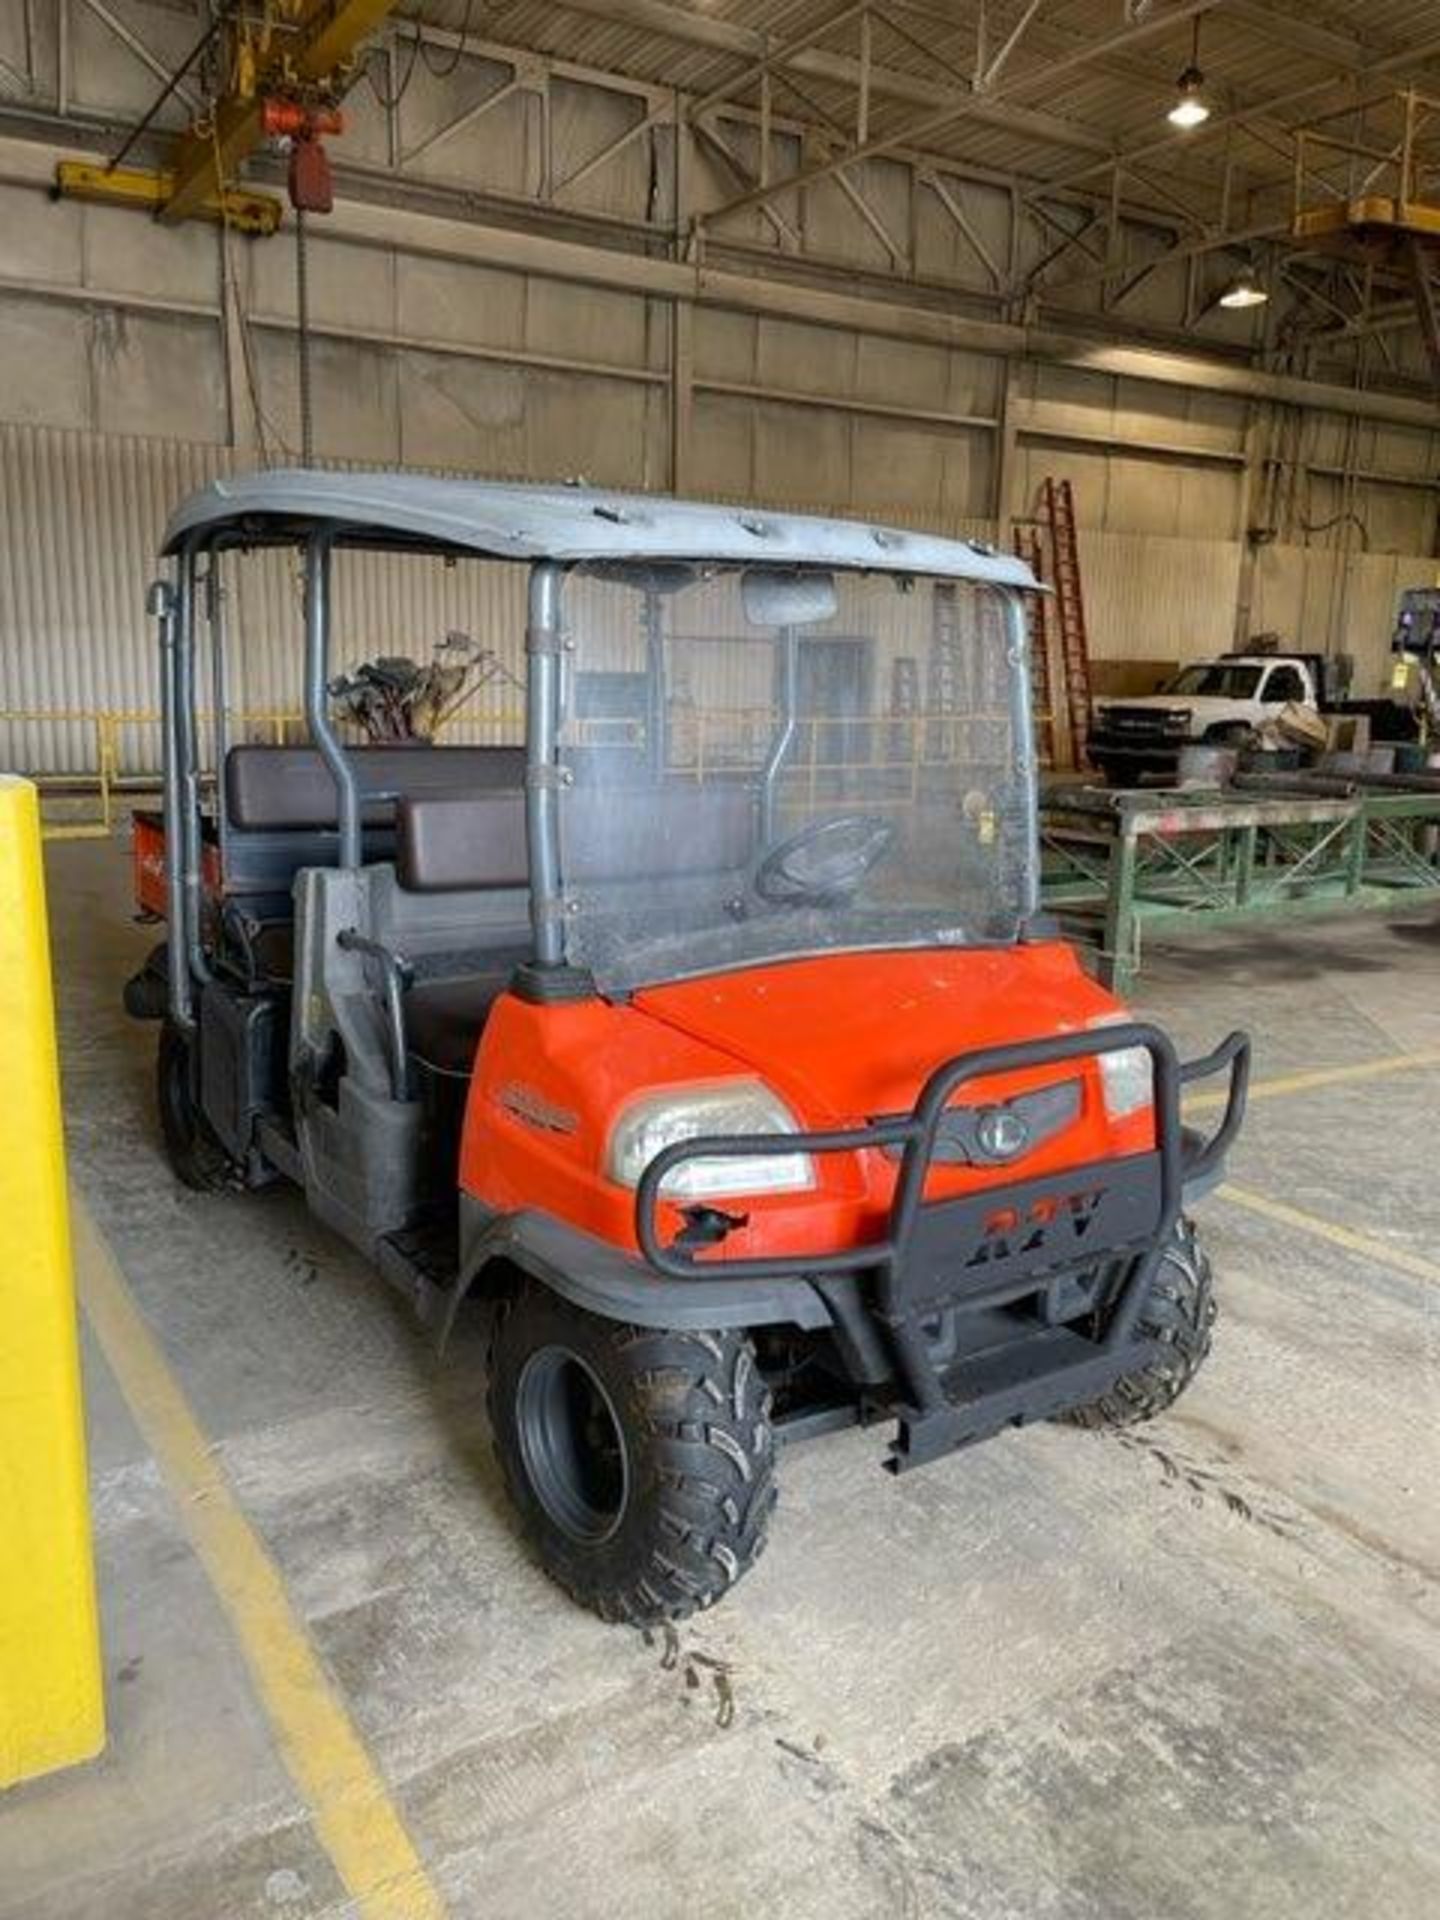 KUBOTA RTV1140 CPX DIESEL UTILITY VEHICLE, 2-ROW COLLAPSIBLE SEATING, CANOPY WITH FRONT